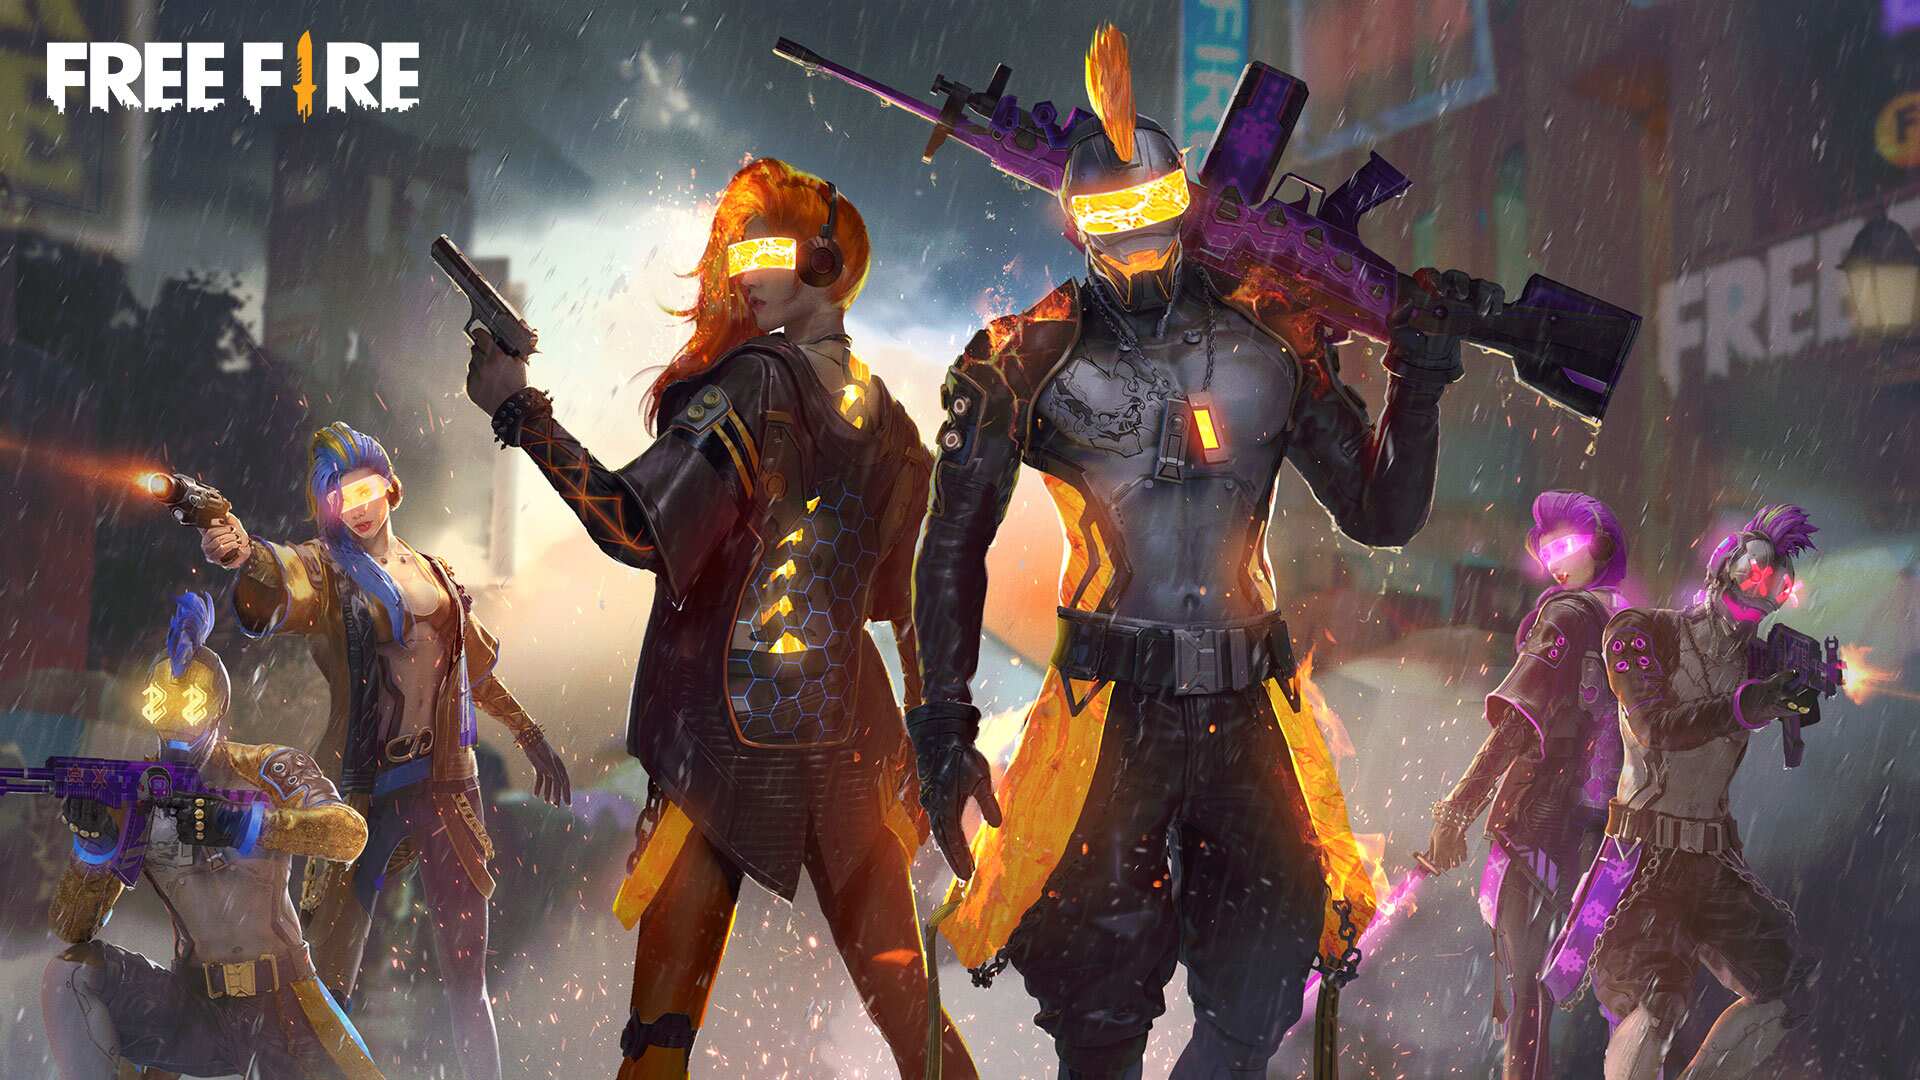 GARENA FREE FIRE Latest Skins For PC Free Download - GDV